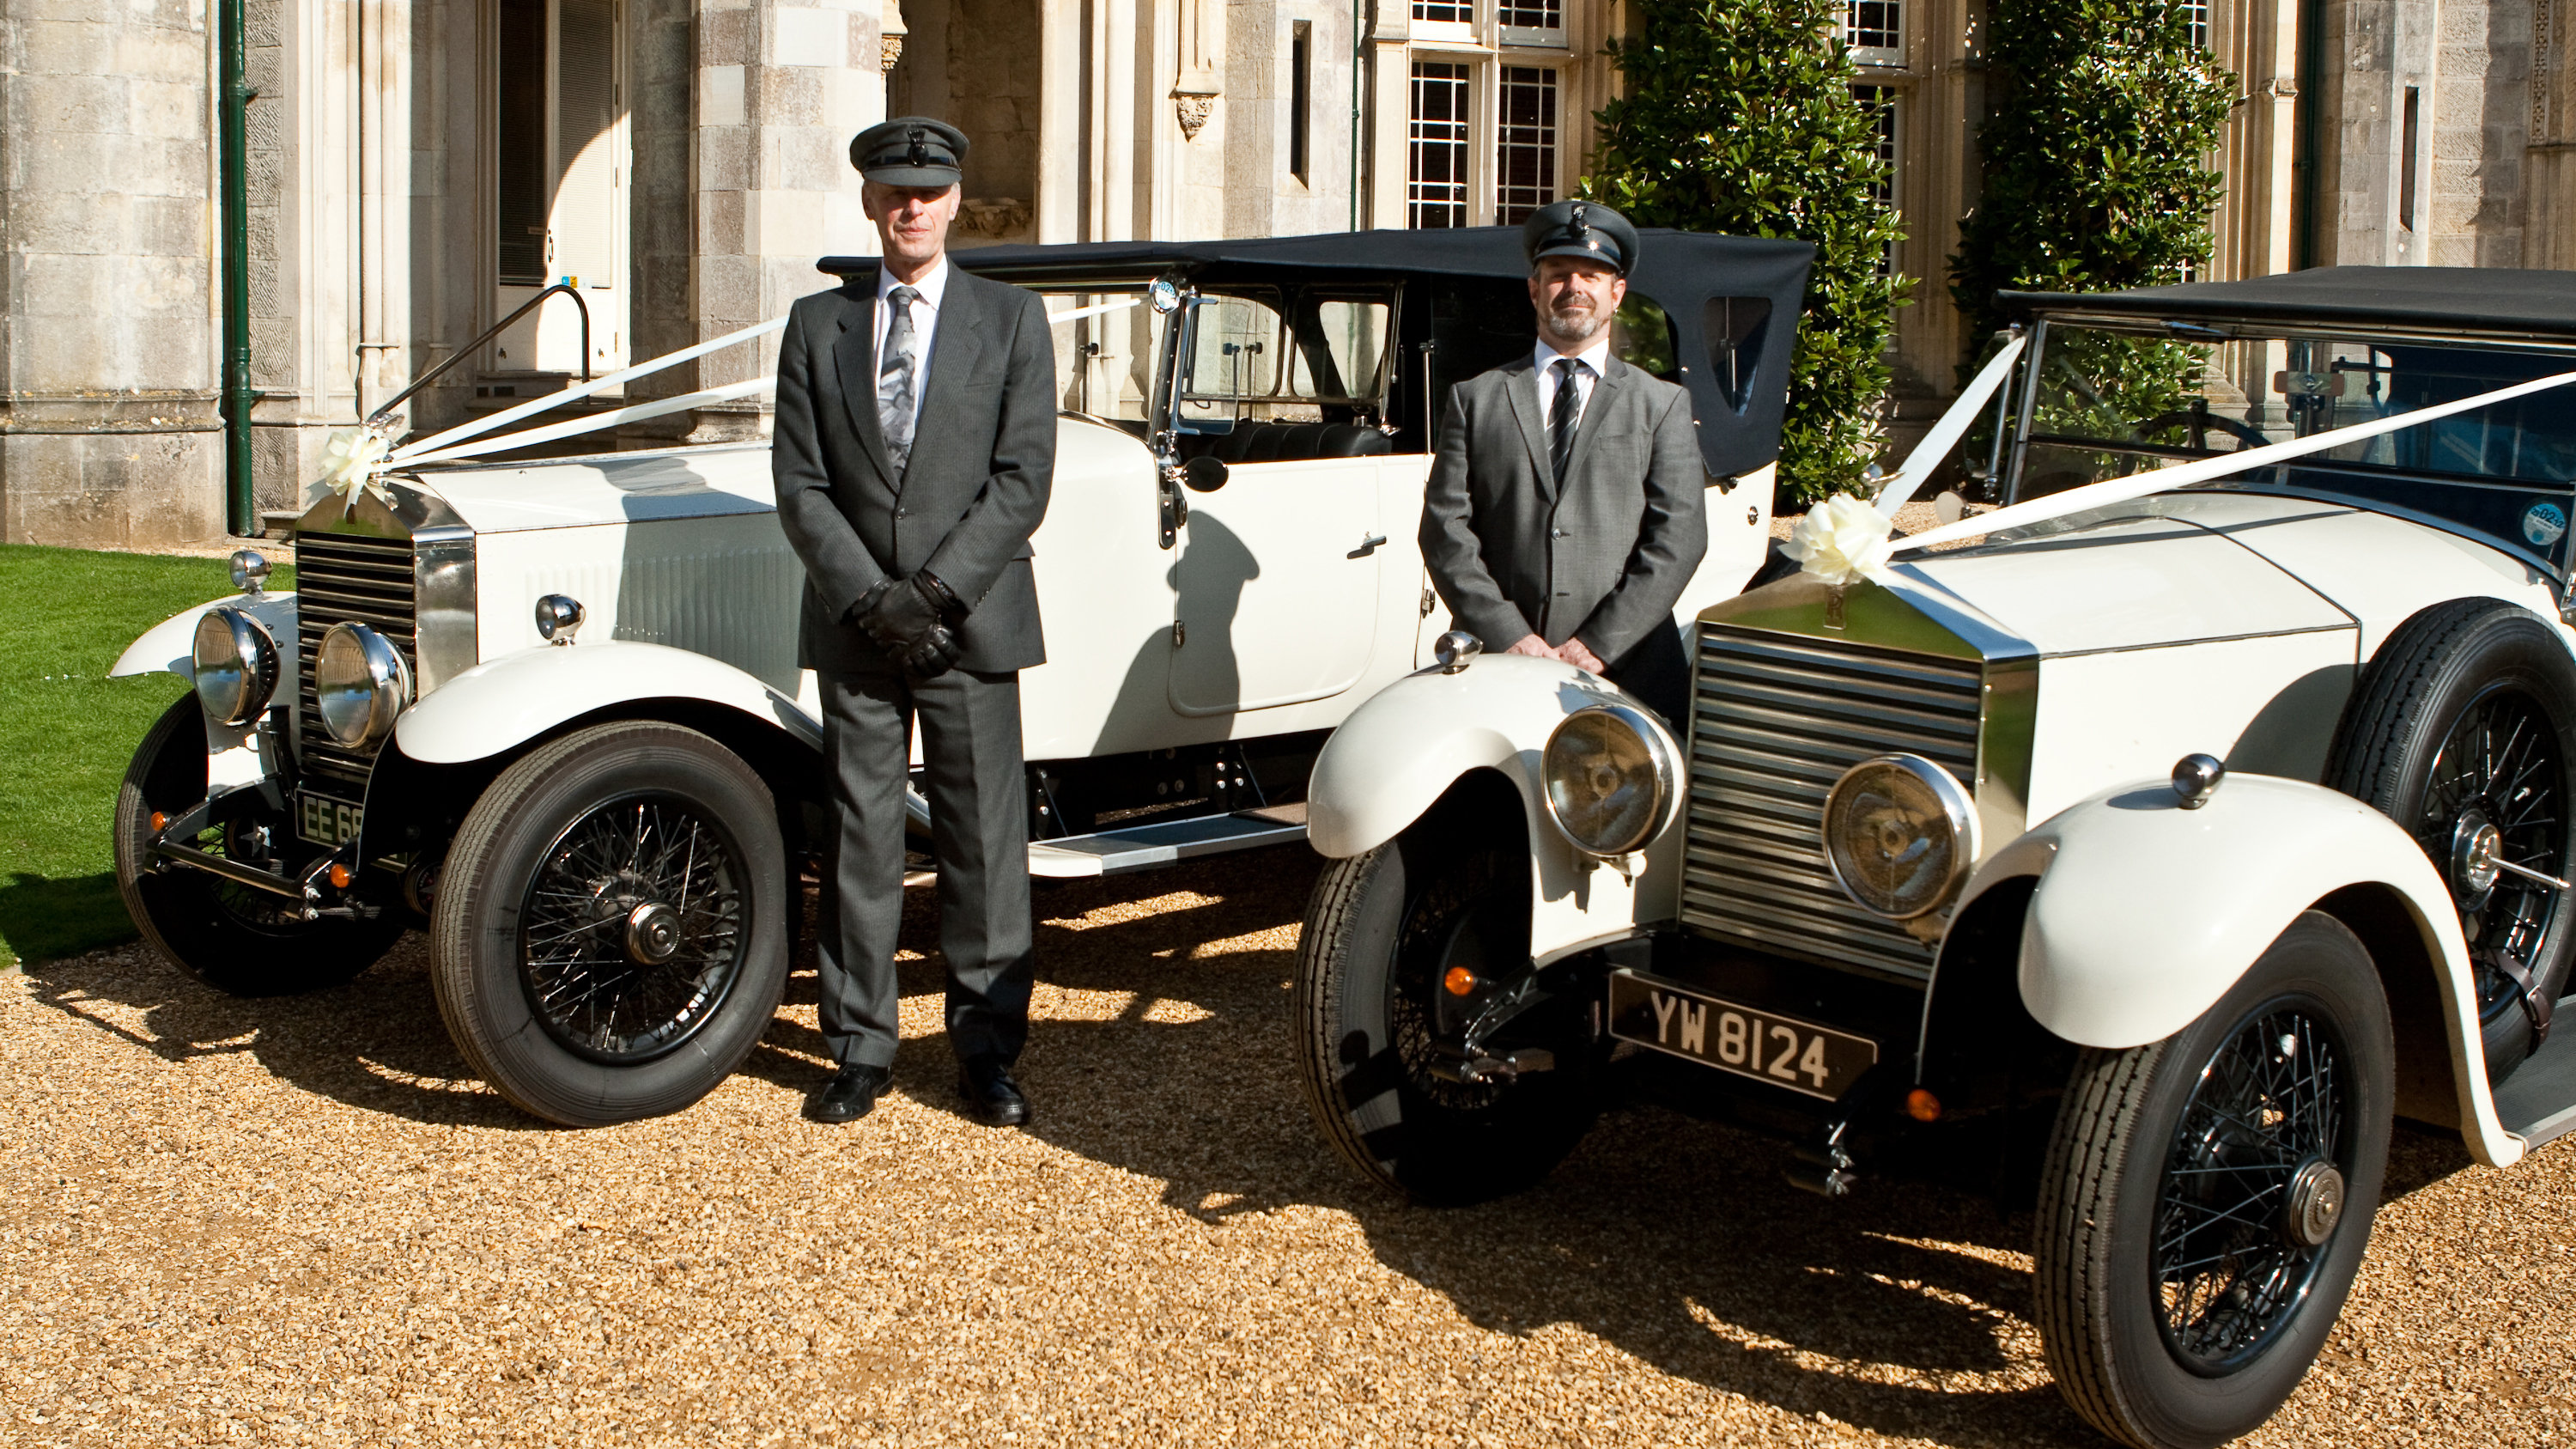 Two vintage wedding cars decorated with white ribbons and bows at a local Broadwindsor wedding. Both vehicles are parked side-by-side with their chauffeurs next to them.